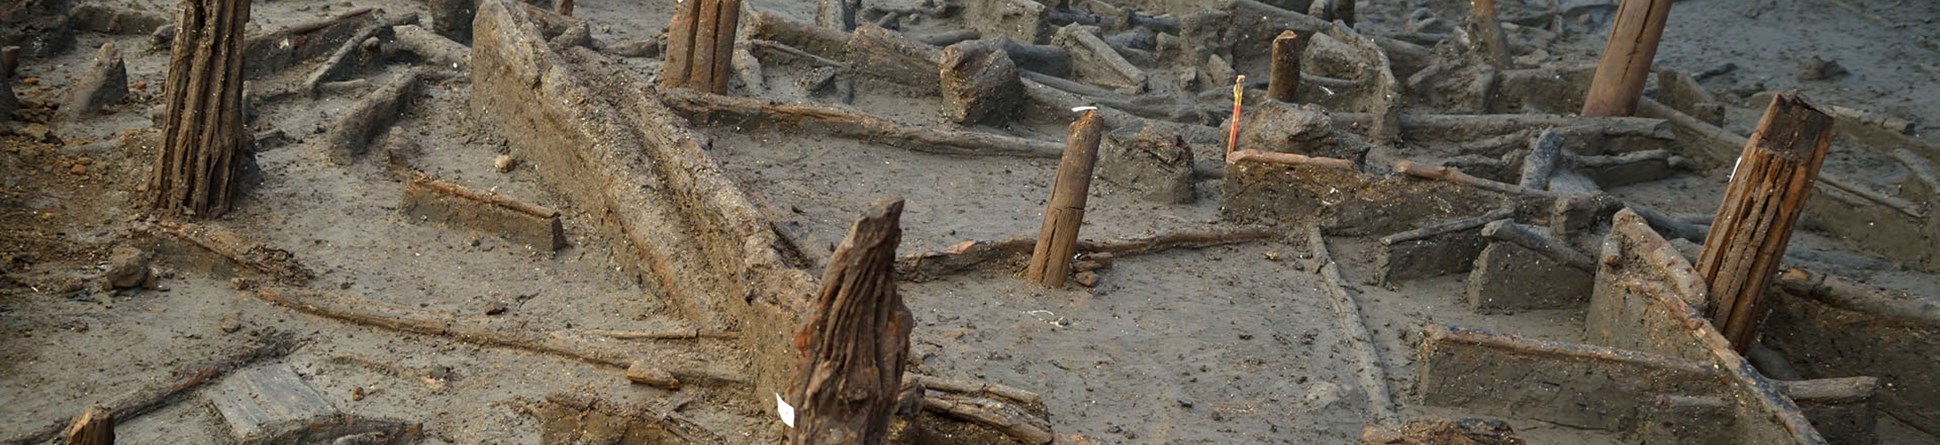 Bronze Age piles preserved within the river silts and collapsed structural timbers